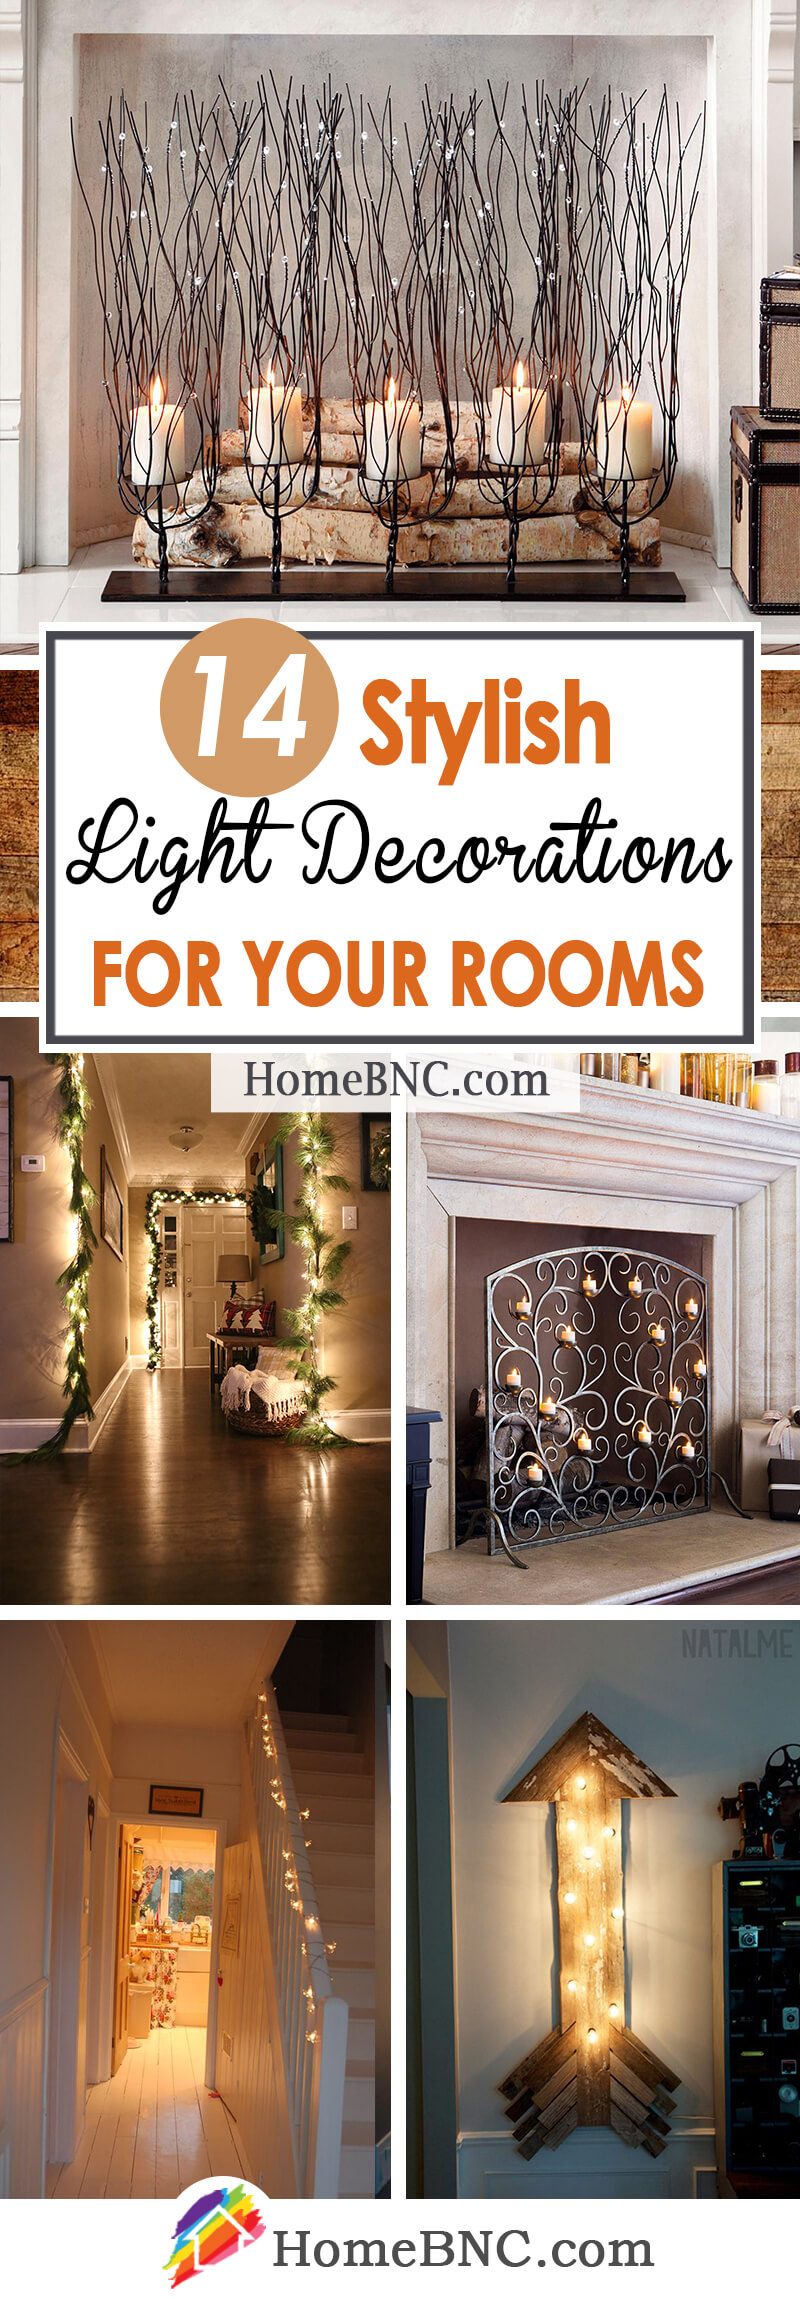 Decorating Your Rooms with Lights